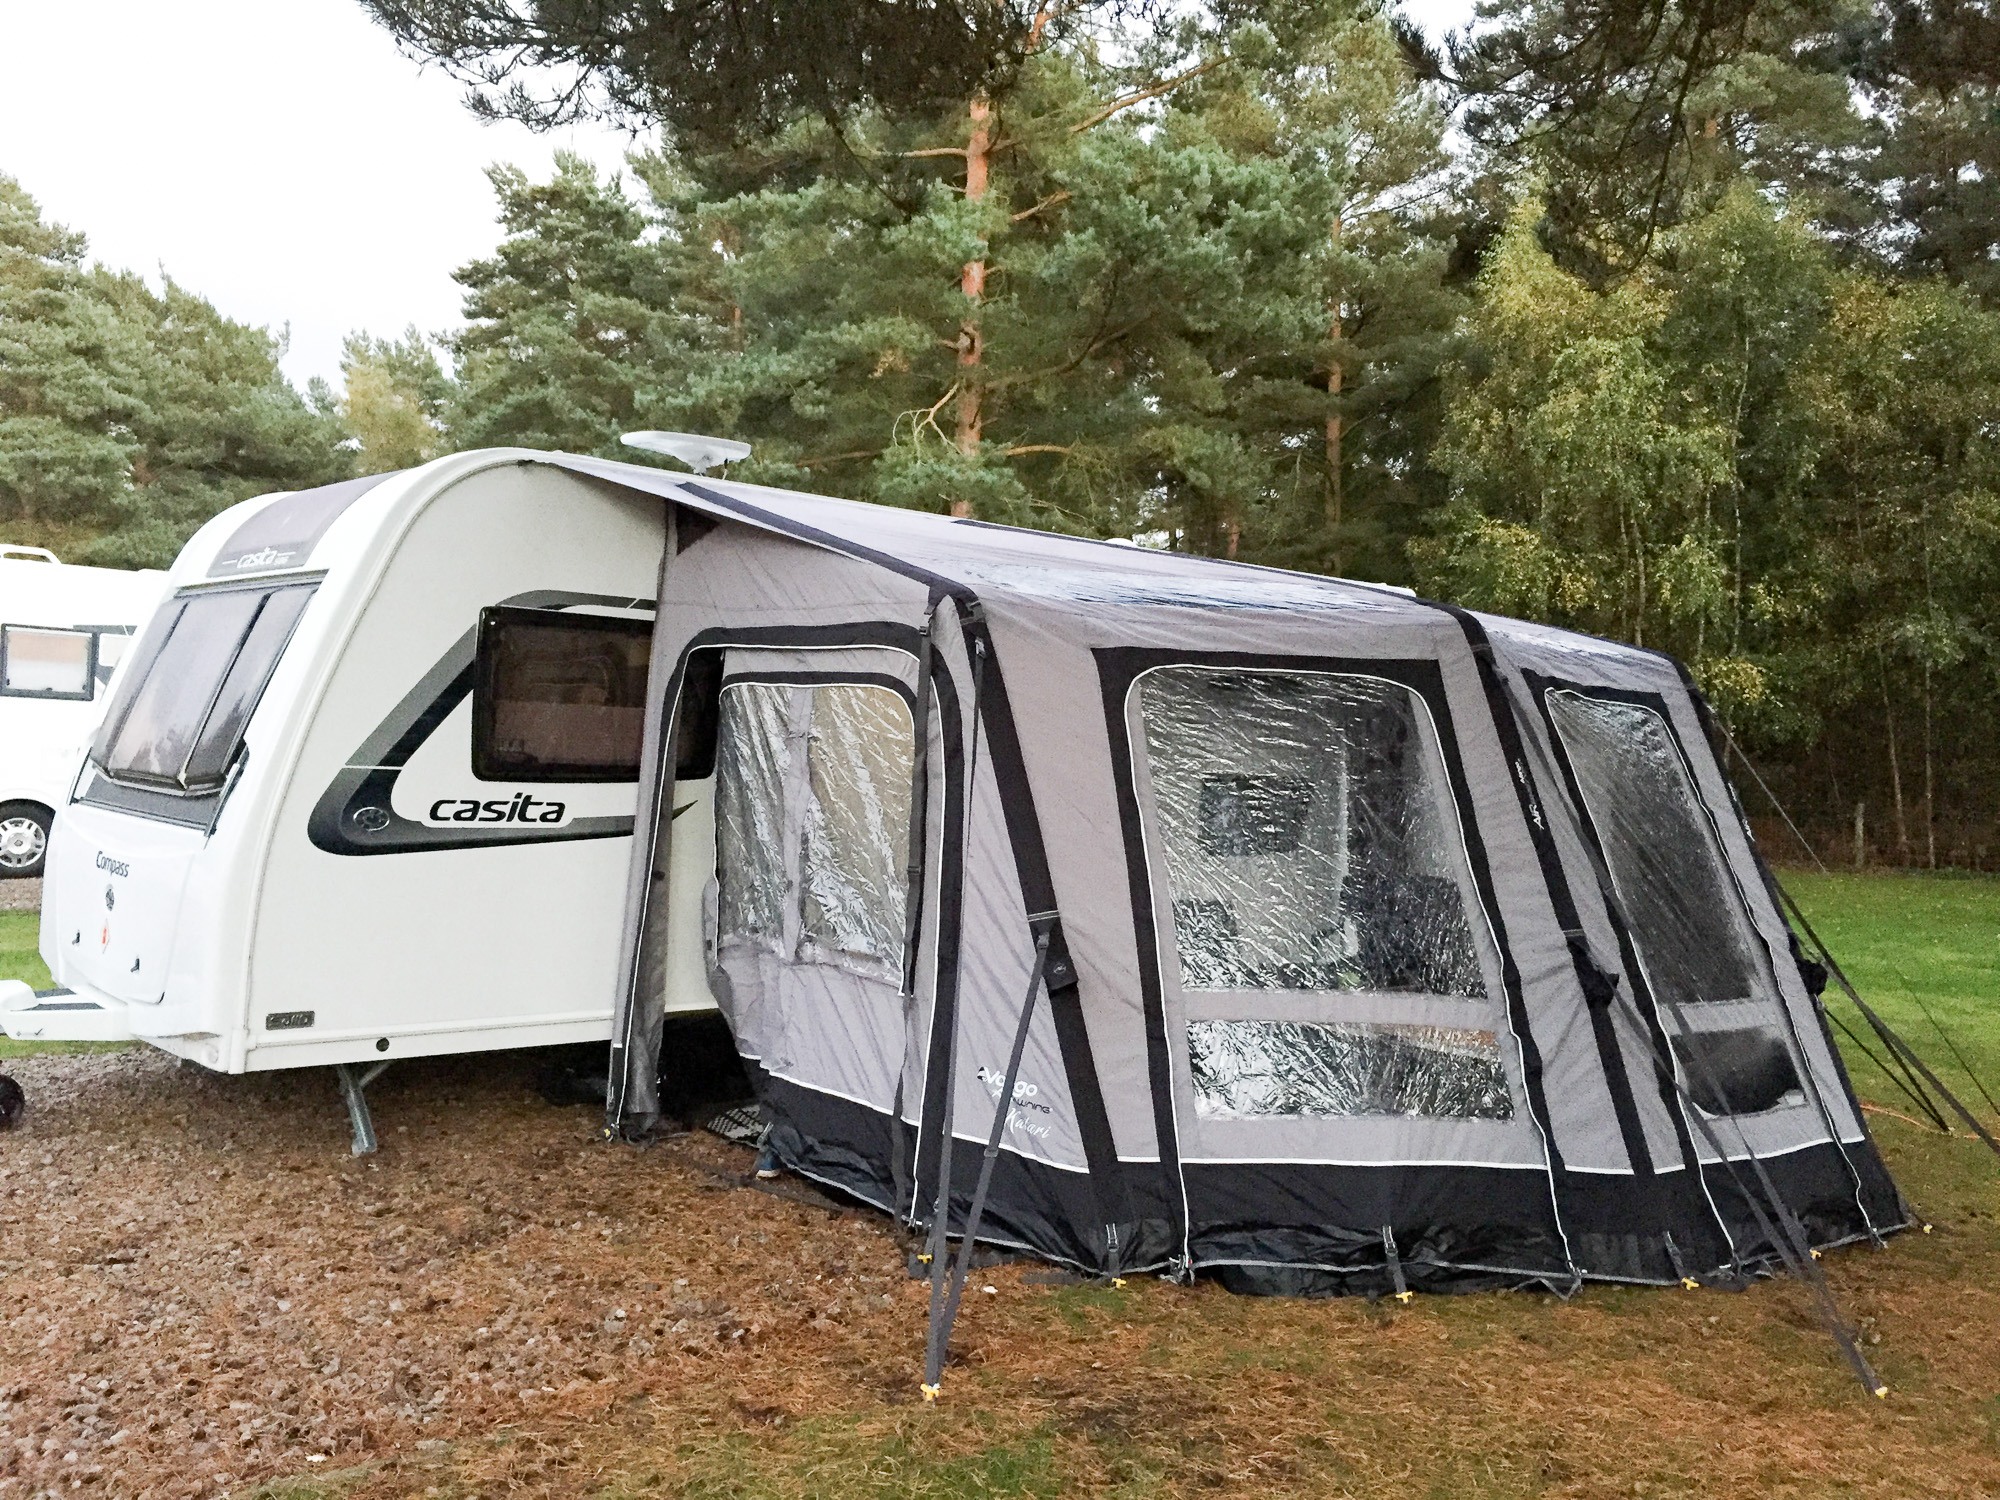  Our caravan pitched at Sandringham